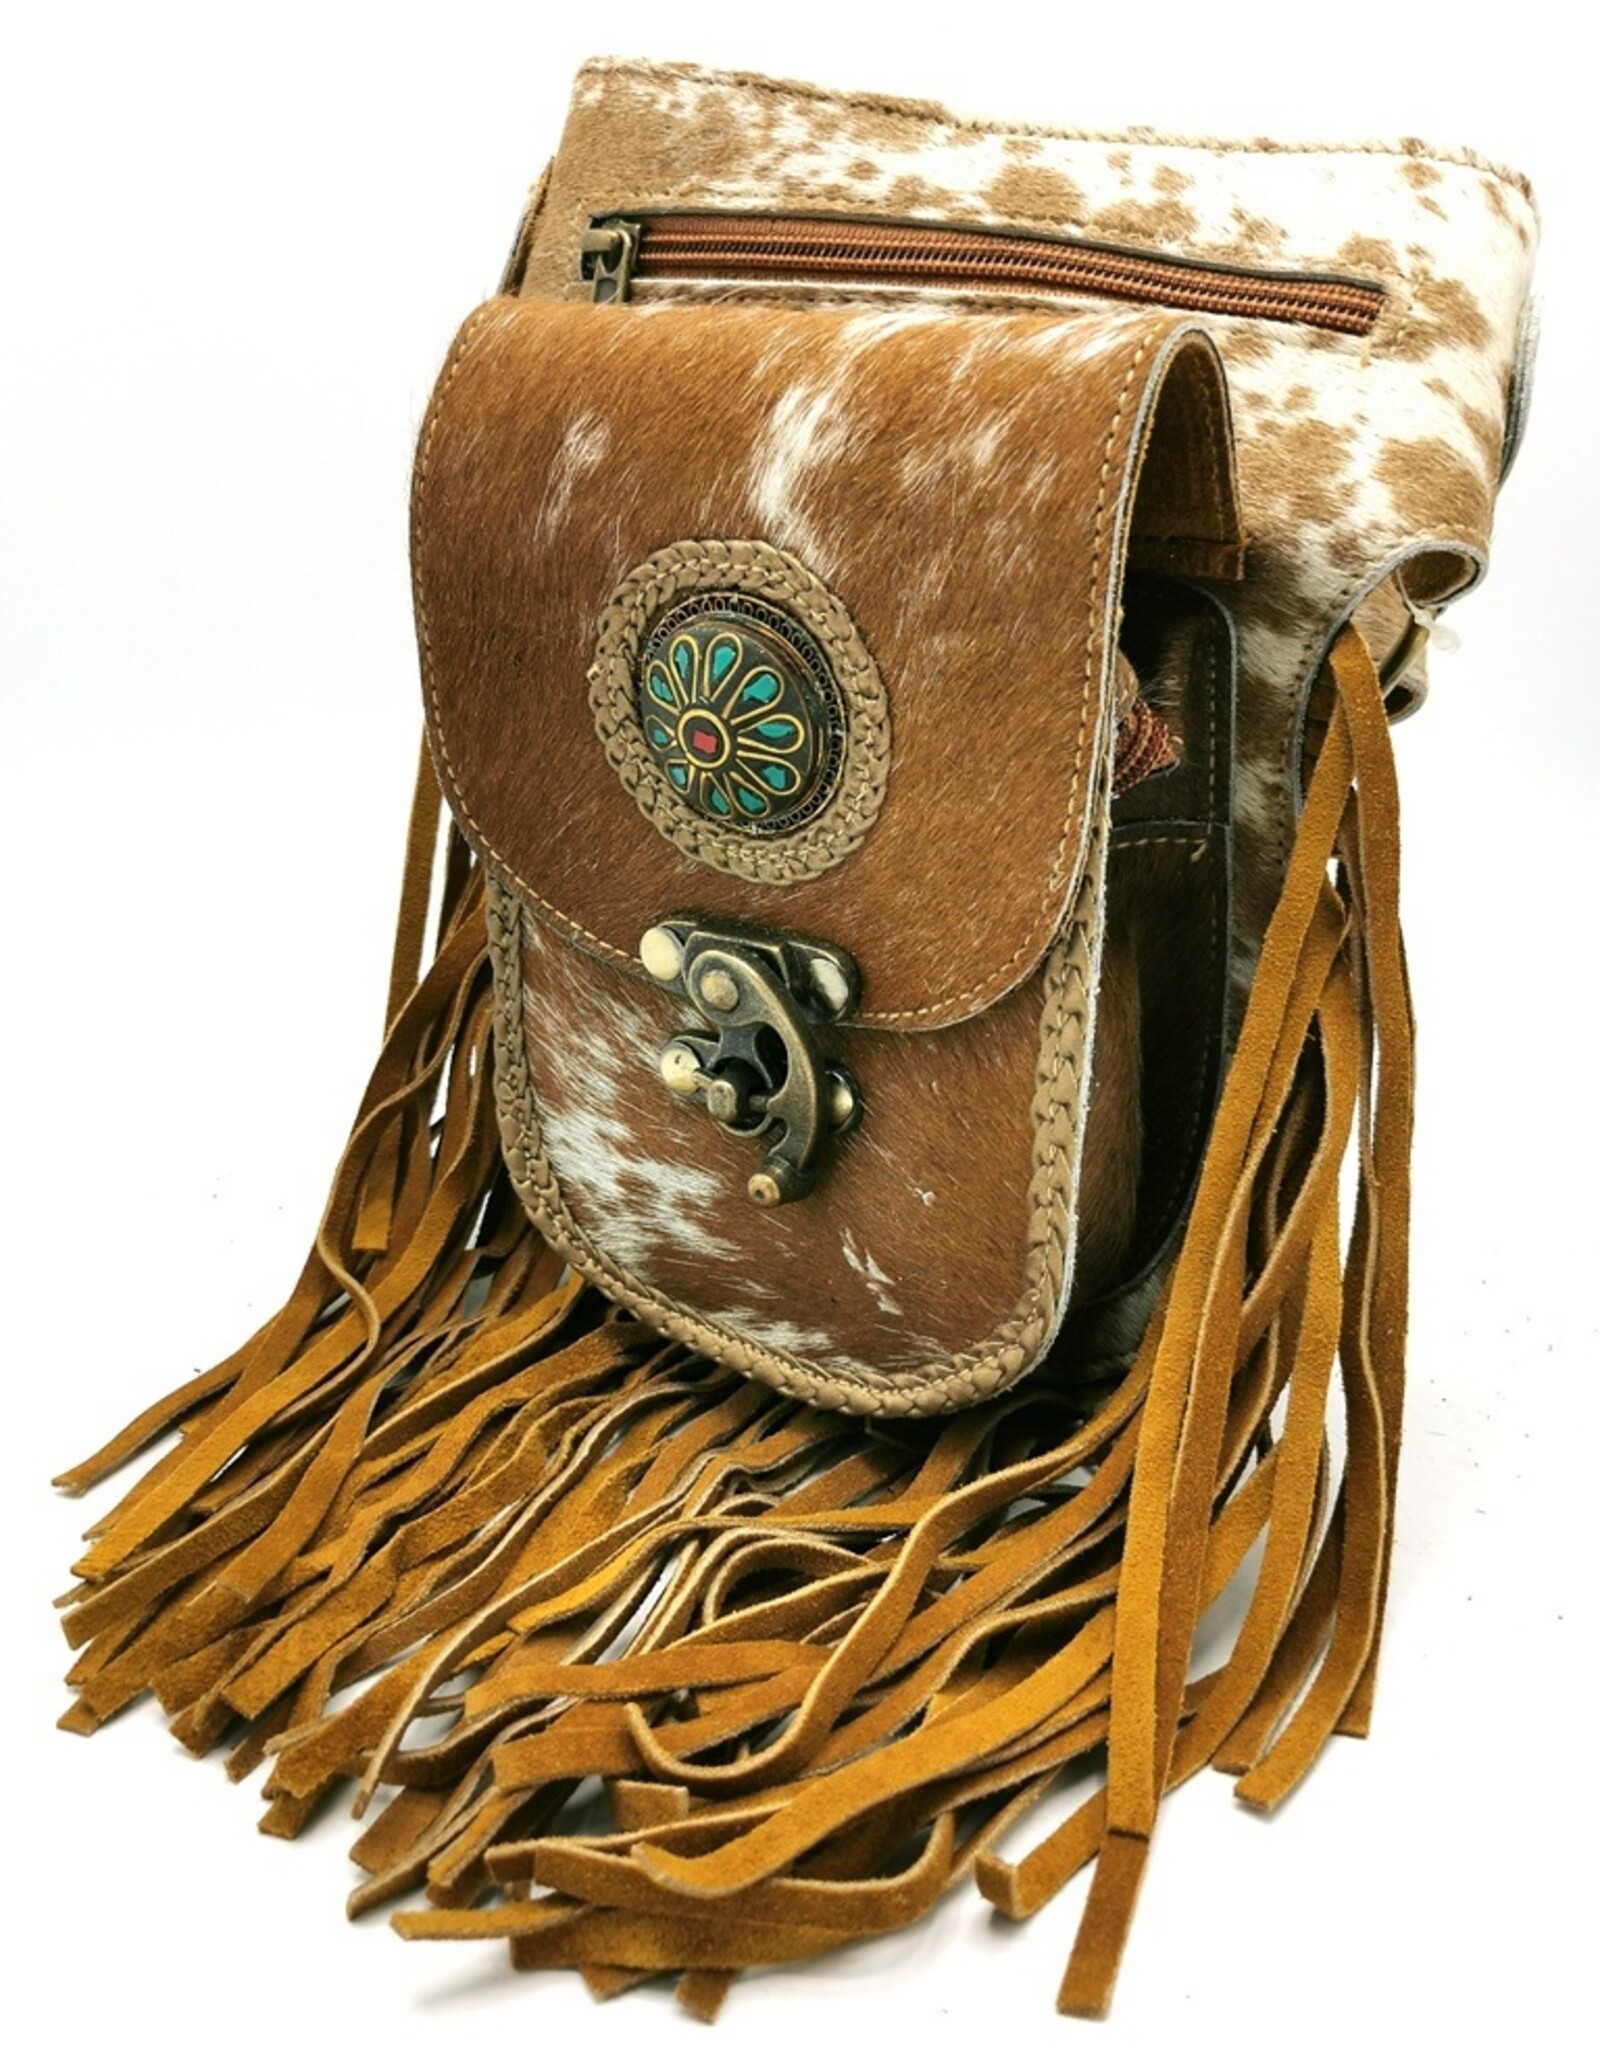 Trukado Leather Festival bags, waist bags and belt bags - Waistbag with Fringes and Cowhide Ibiza Style